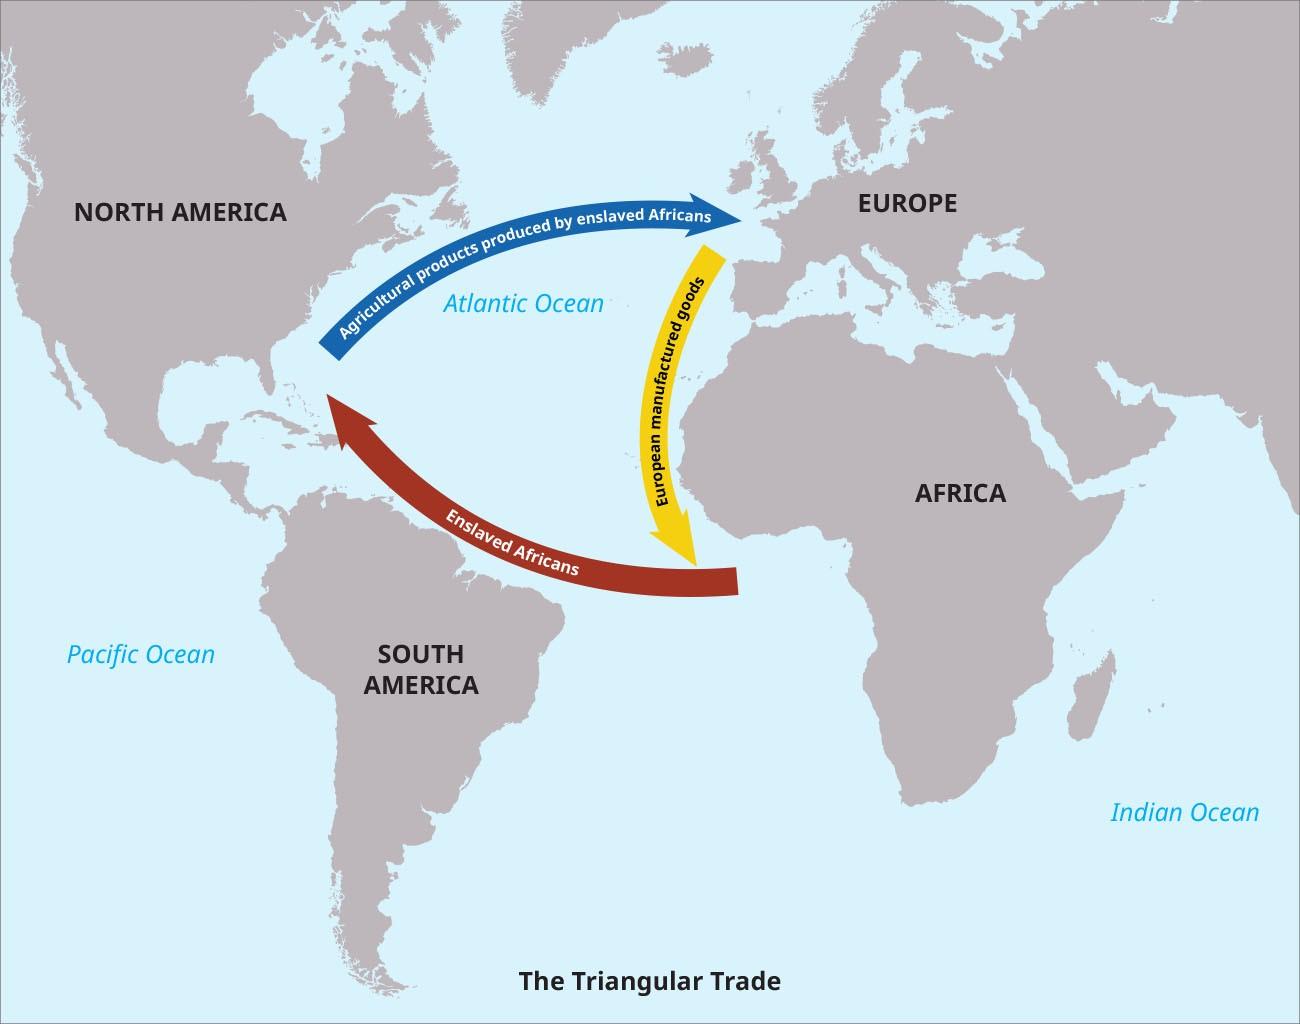 Map of the world showing the triangular trade